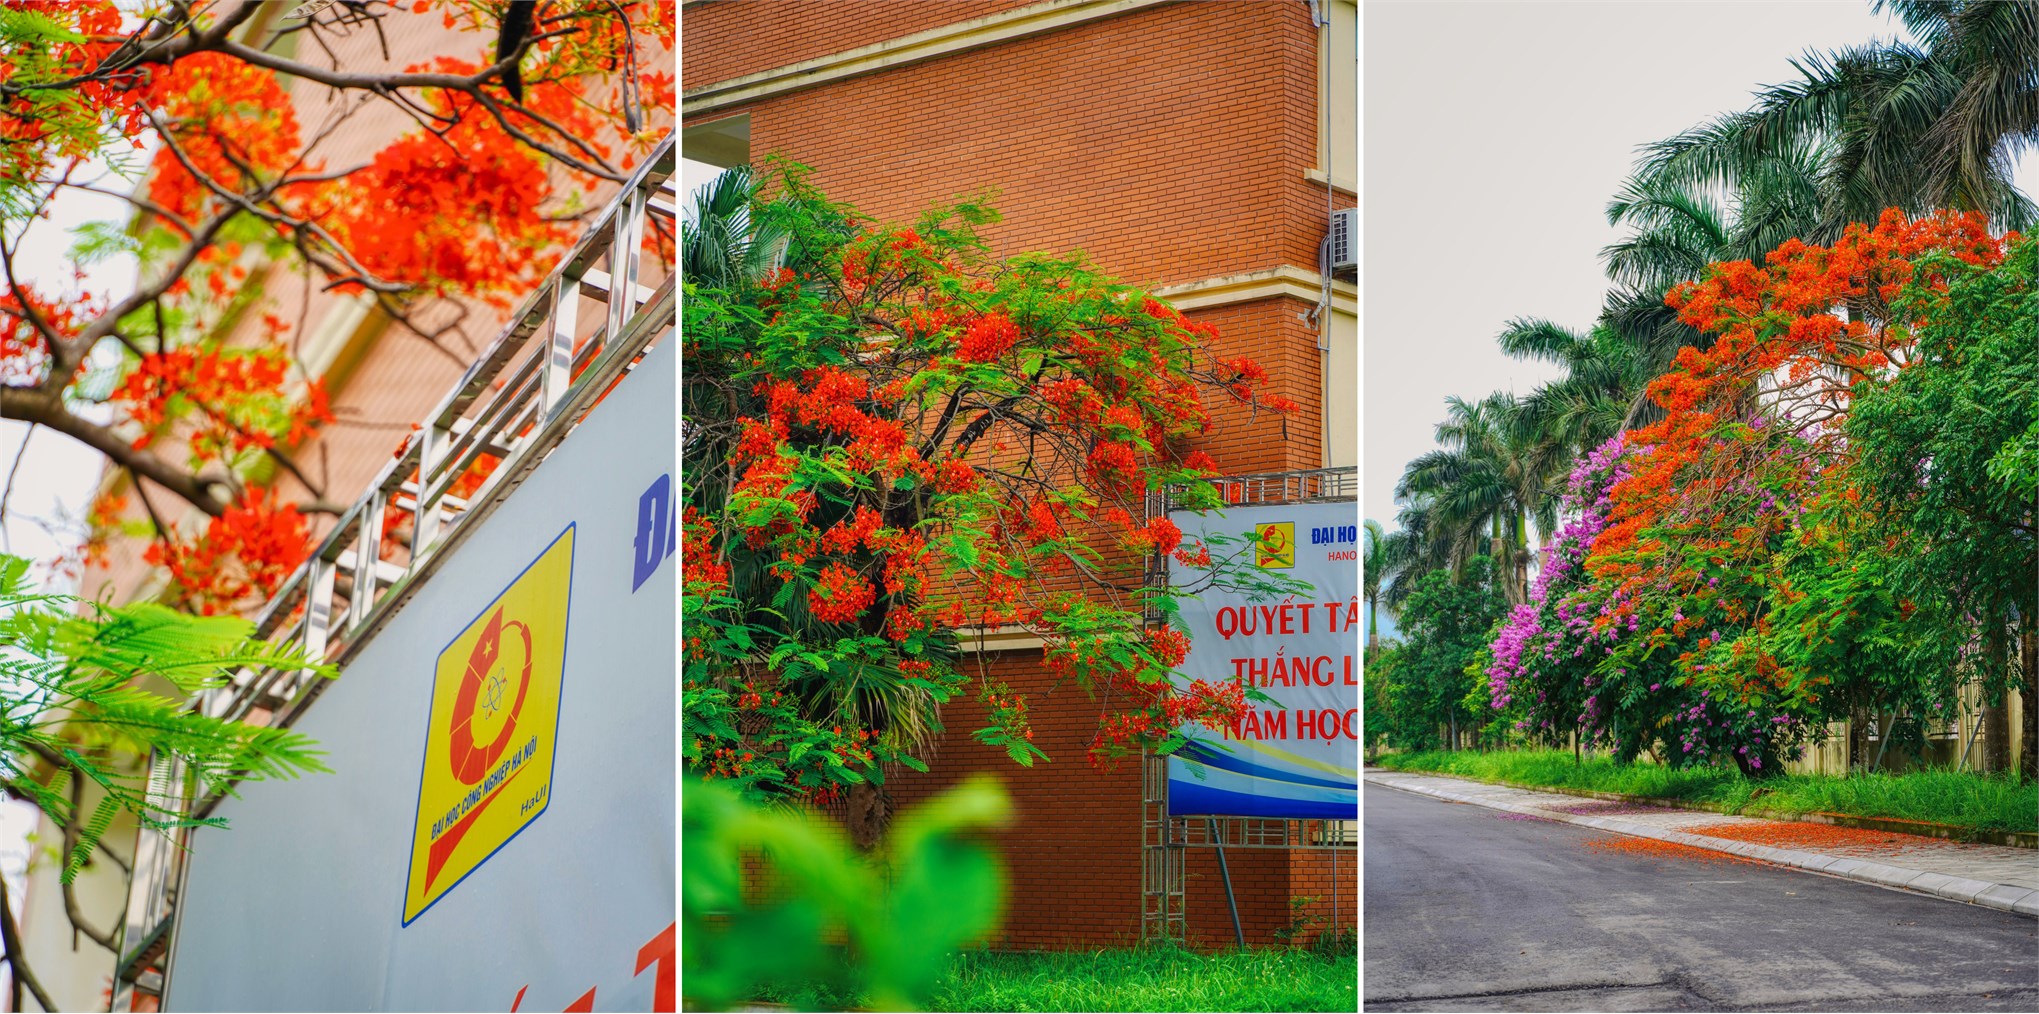 The campus of Hanoi University of Industry bursts into a riot of color as vibrant flowers adorn its pathways and green spaces